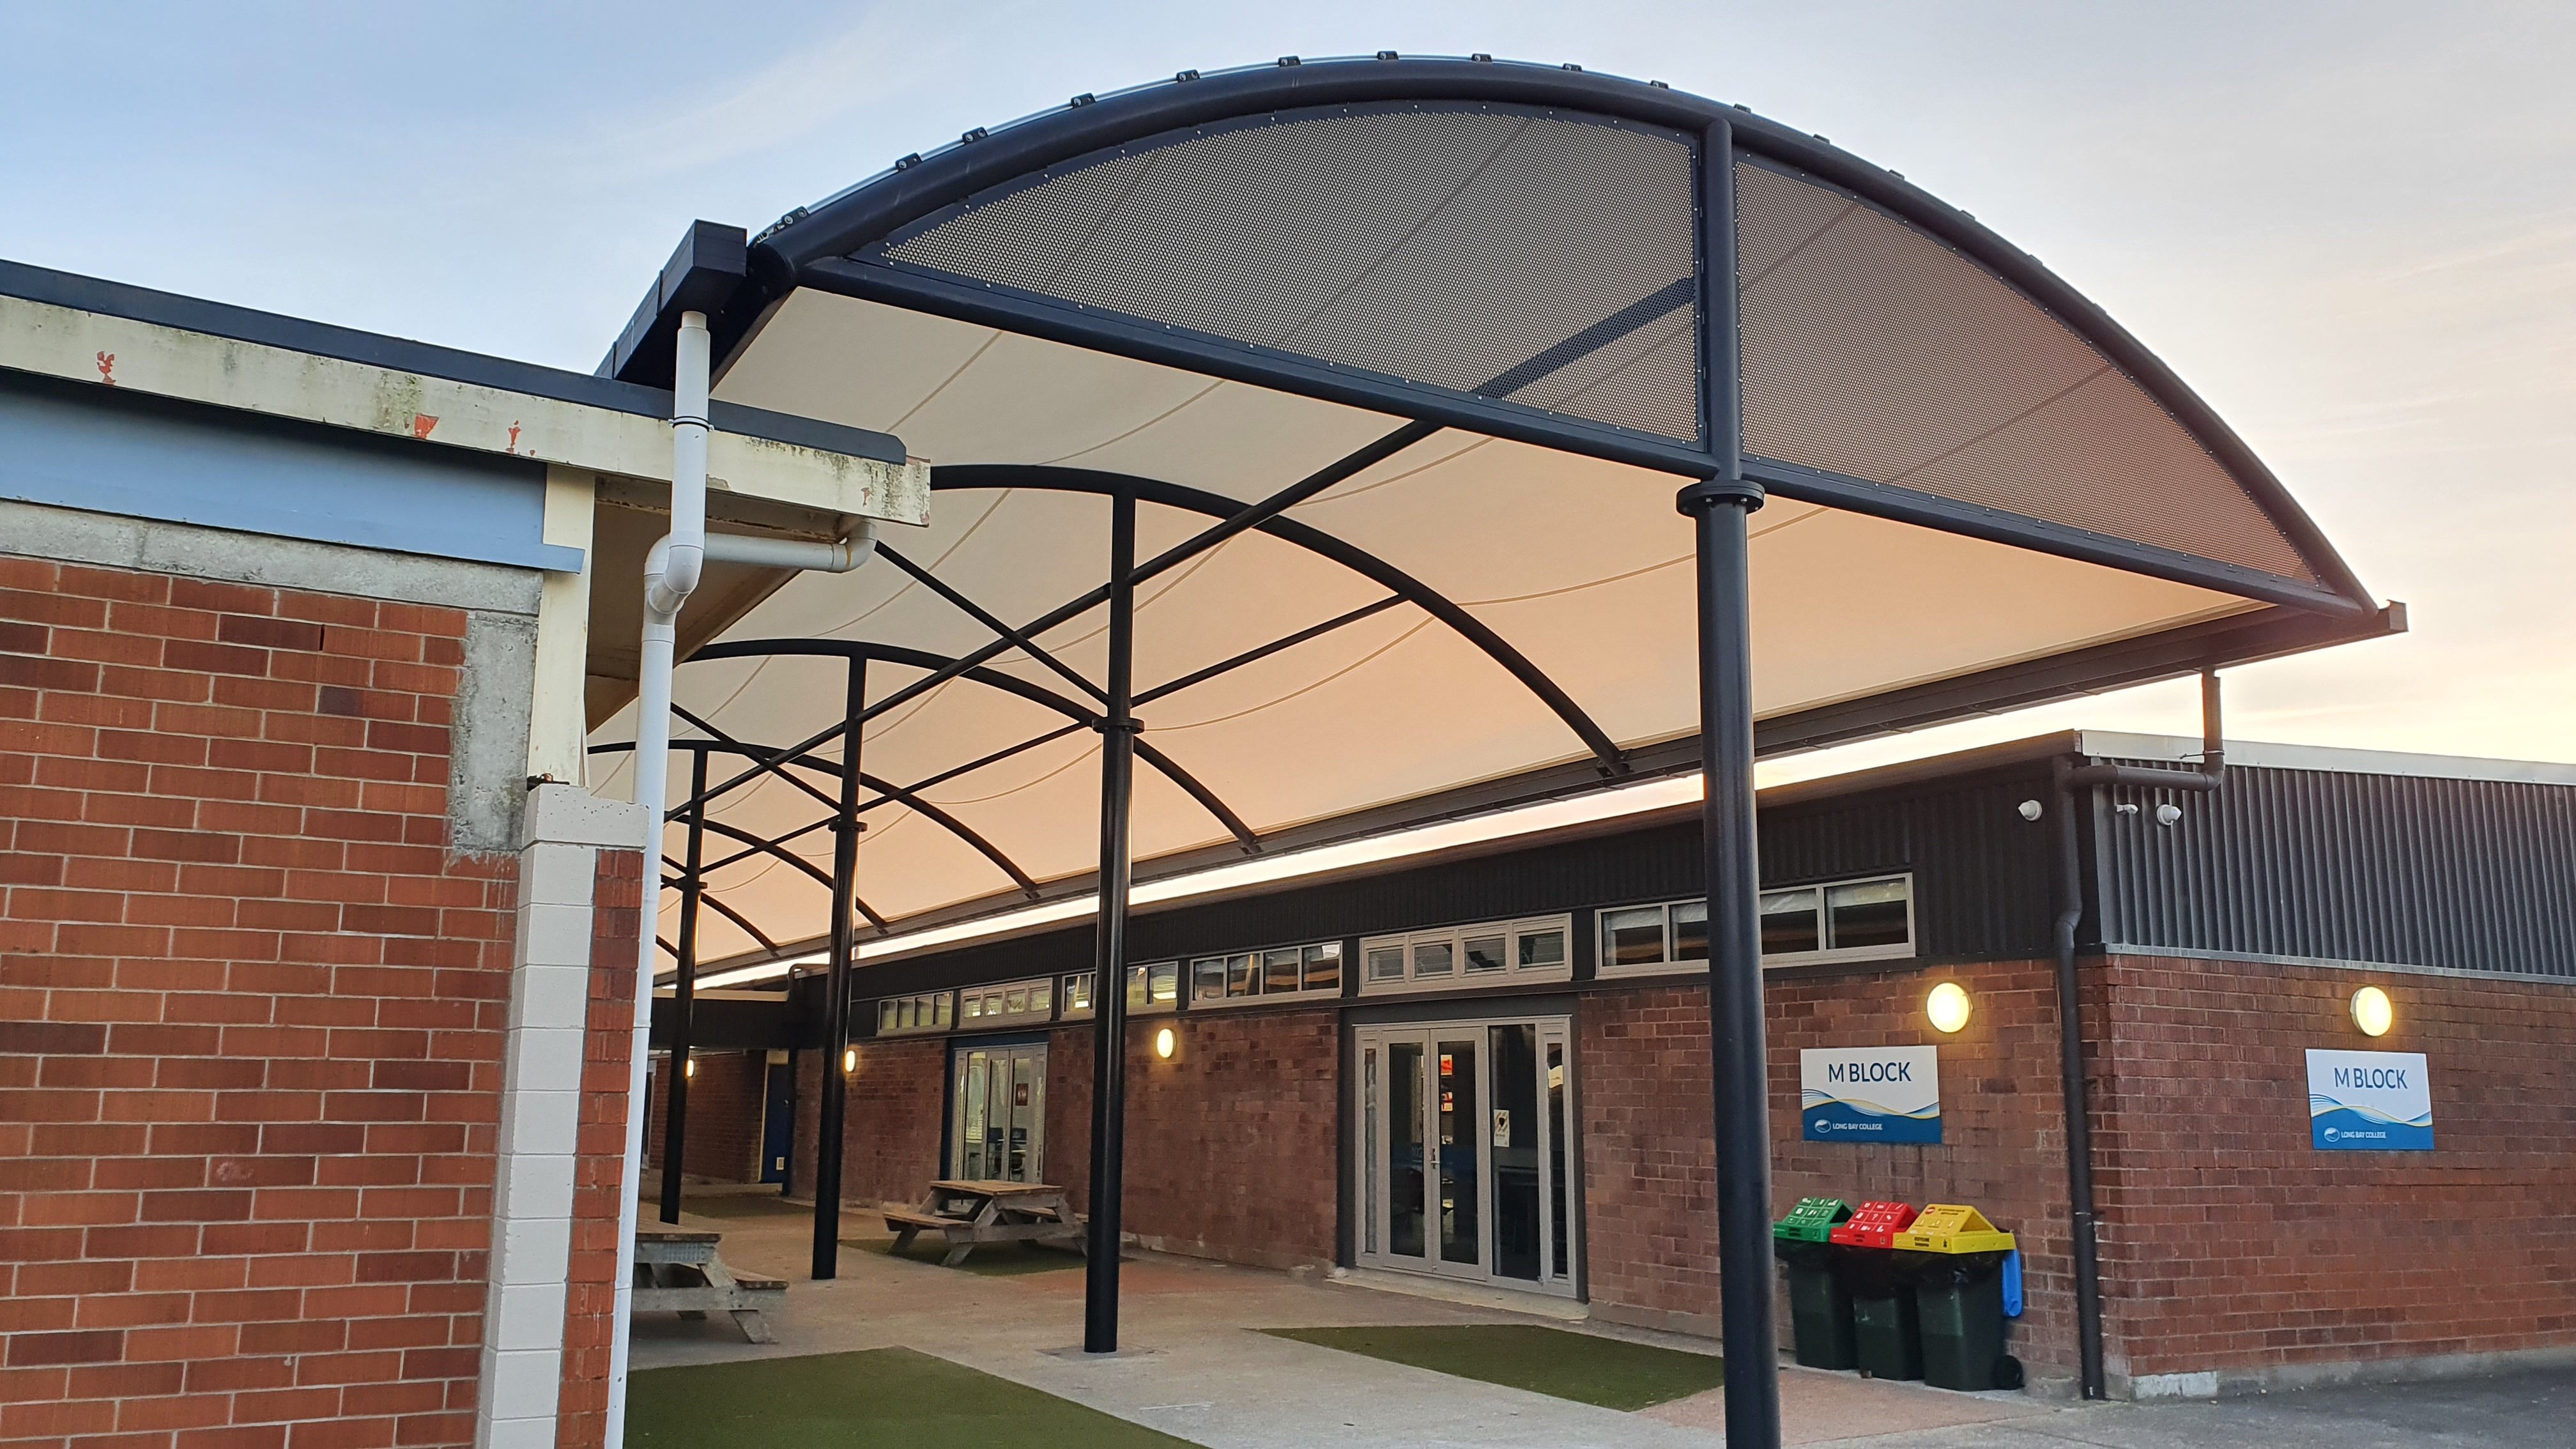 A large rounded outdoor shade covering a school walk way with brick buildings either side 